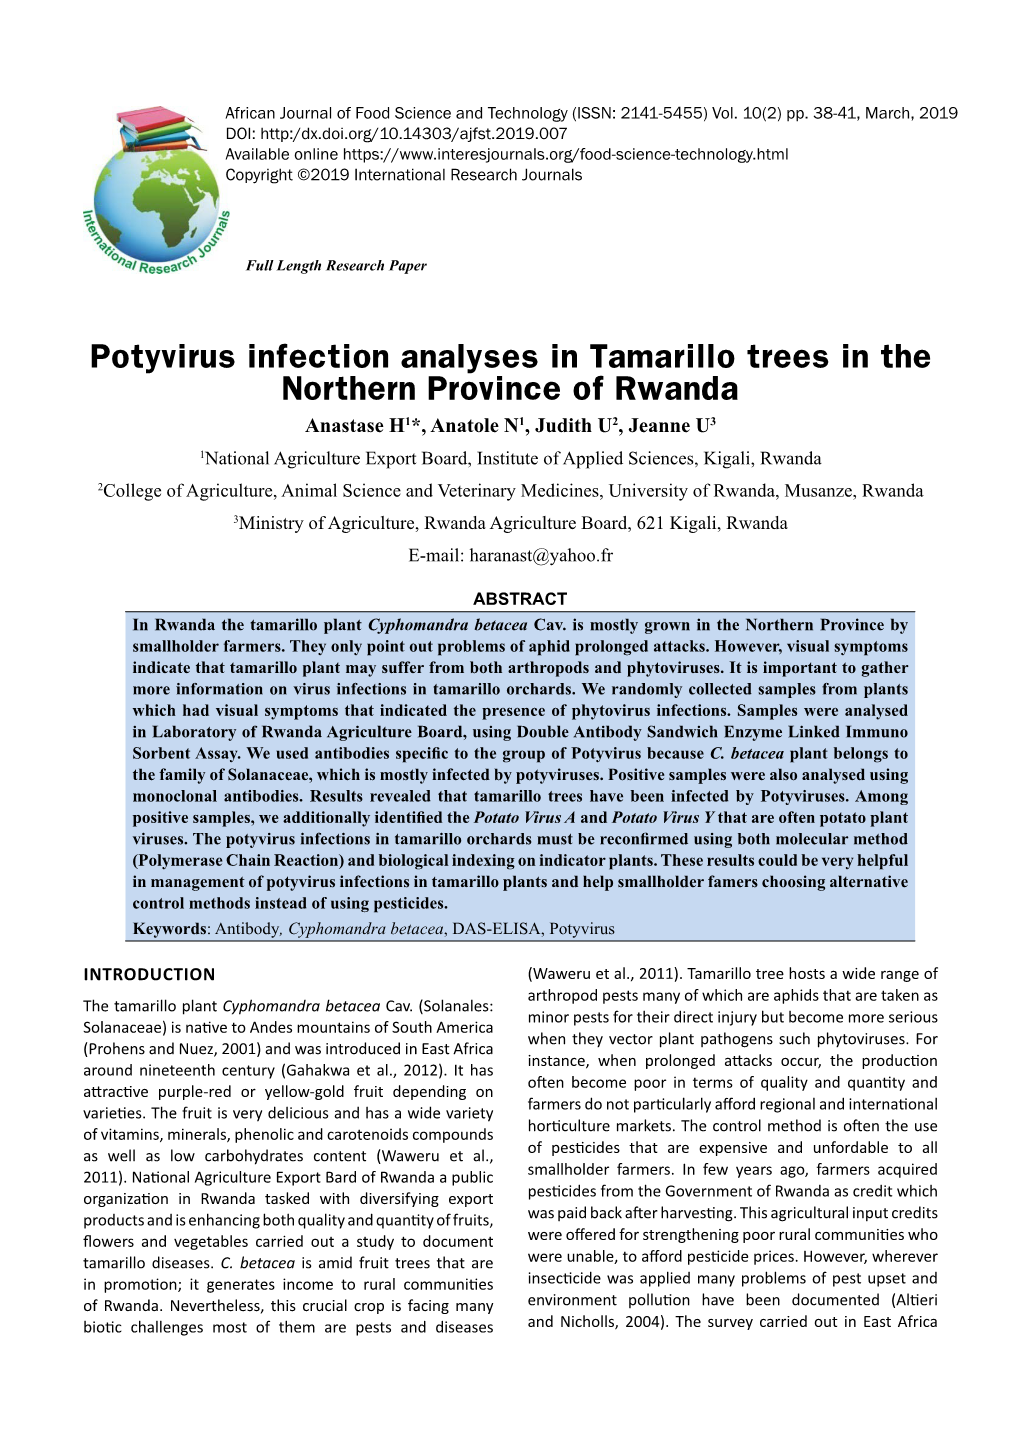 Potyvirus Infection Analyses in Tamarillo Trees in the Northern